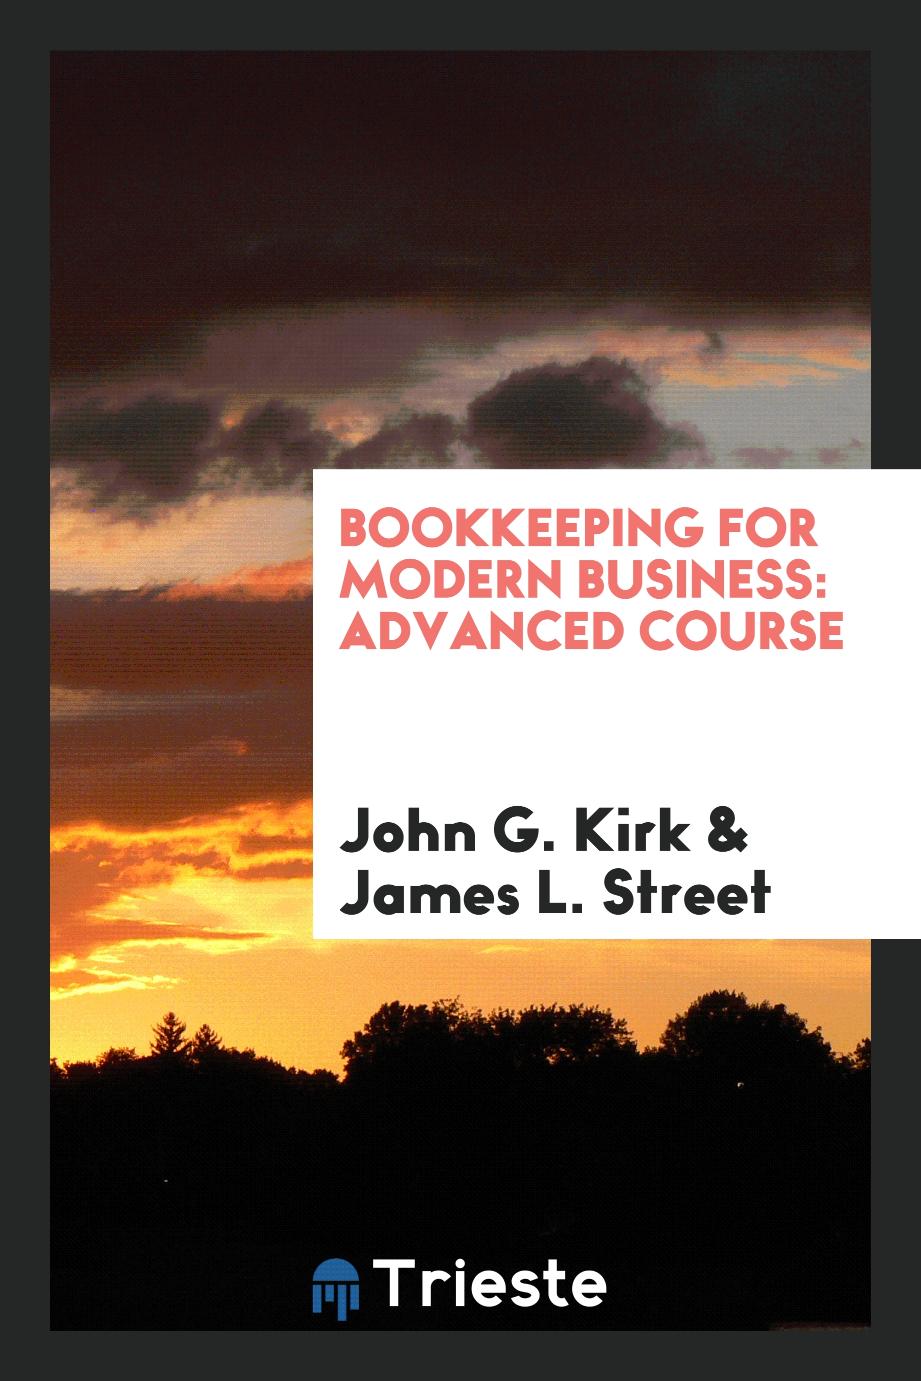 Bookkeeping for Modern Business: Advanced Course